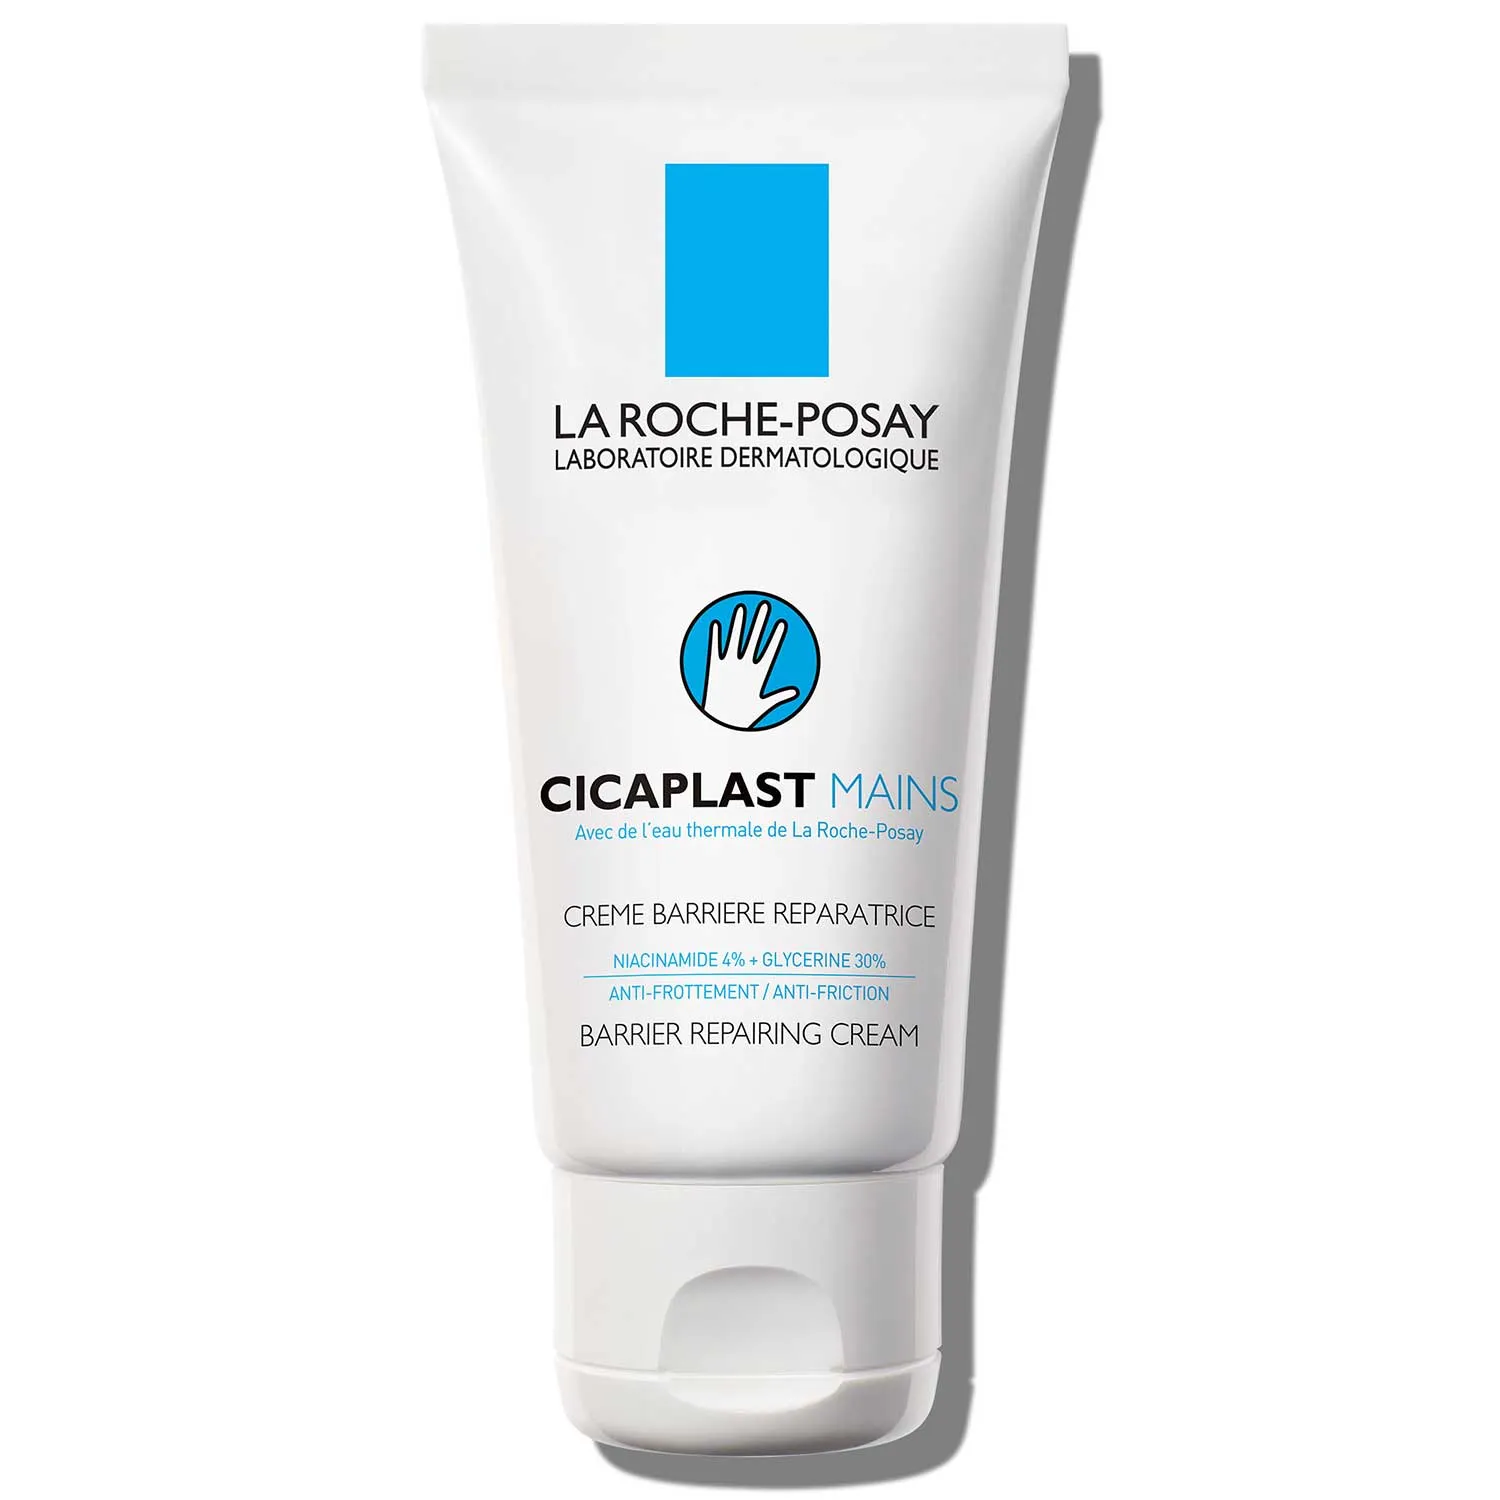 Cicaplast Hand Cream by La Roche Posay, the best soothing French hand cream.